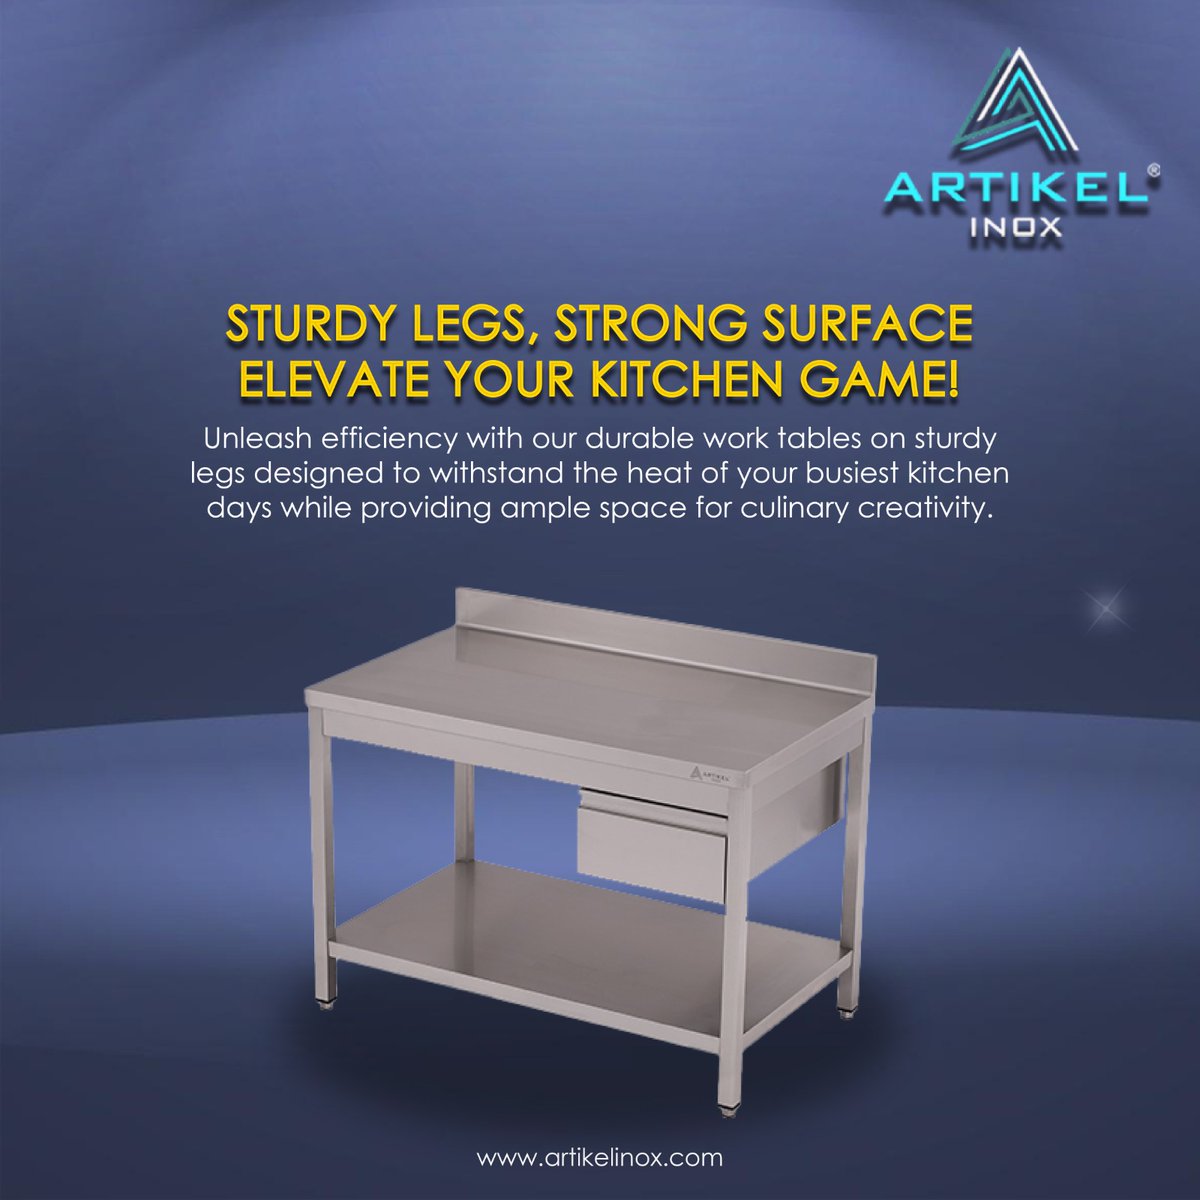 Upgrade Your Kitchen Game: Robust Legs, Strong Surfaces!

#KitchenUpgrade #CulinaryEssentials #CookingGoals #KitchenRenovation #StrongAndSturdy #ElevateYourCooking #ChefLife #DurableDesigns #HomeCooking #QualityCraftsmanship